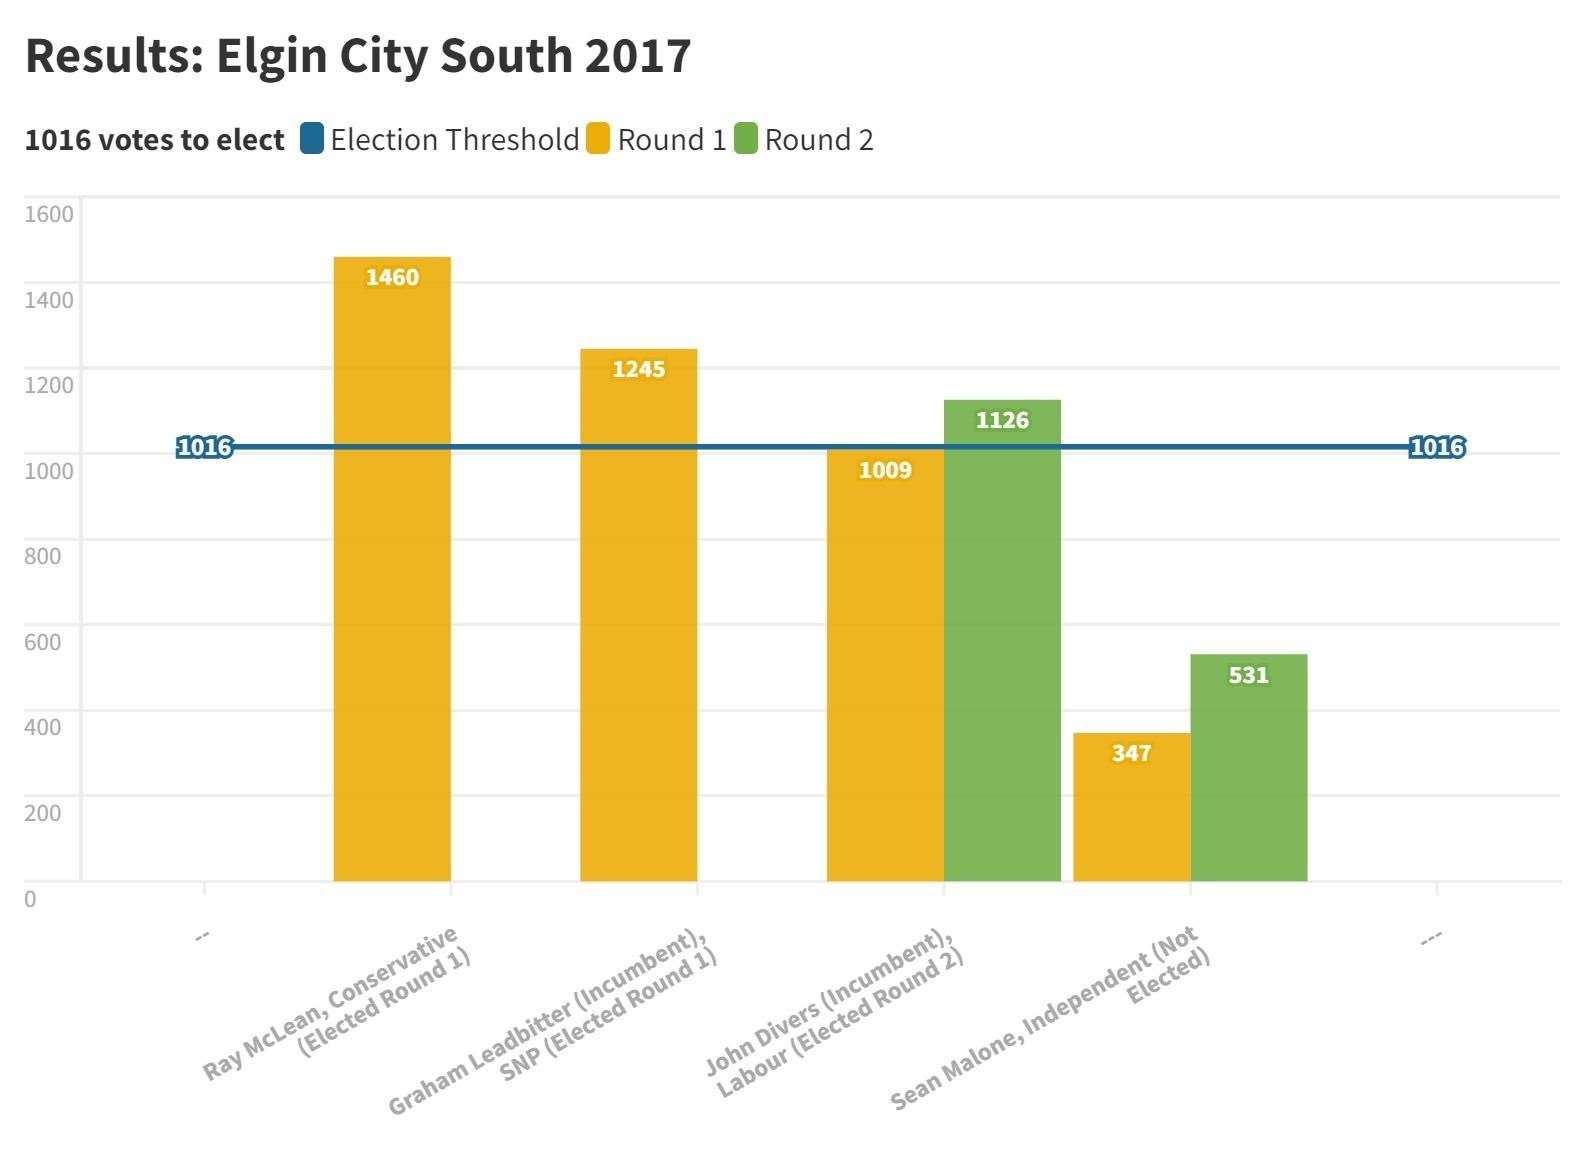 Elgin City South results in 2017.